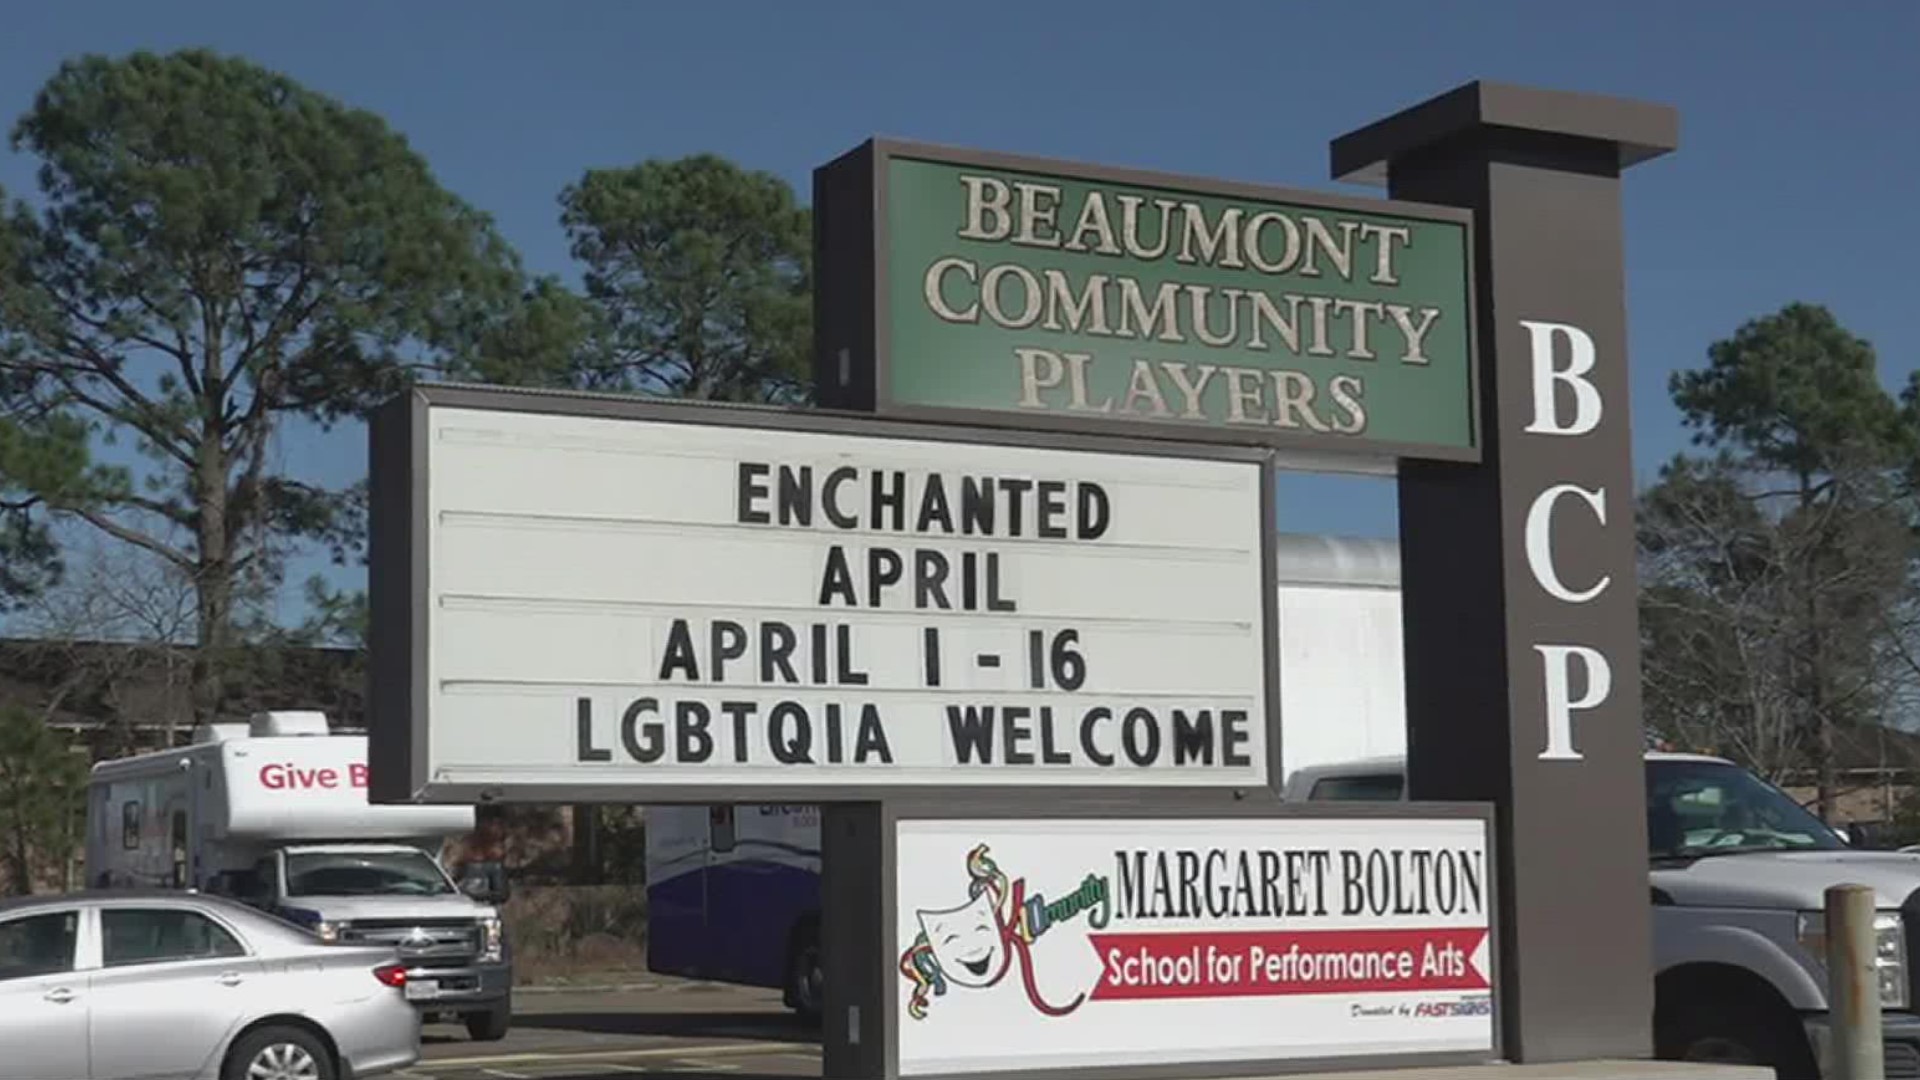 Beaumont Community Players taking stand against anti-LGBTQ bills 12newsnow image